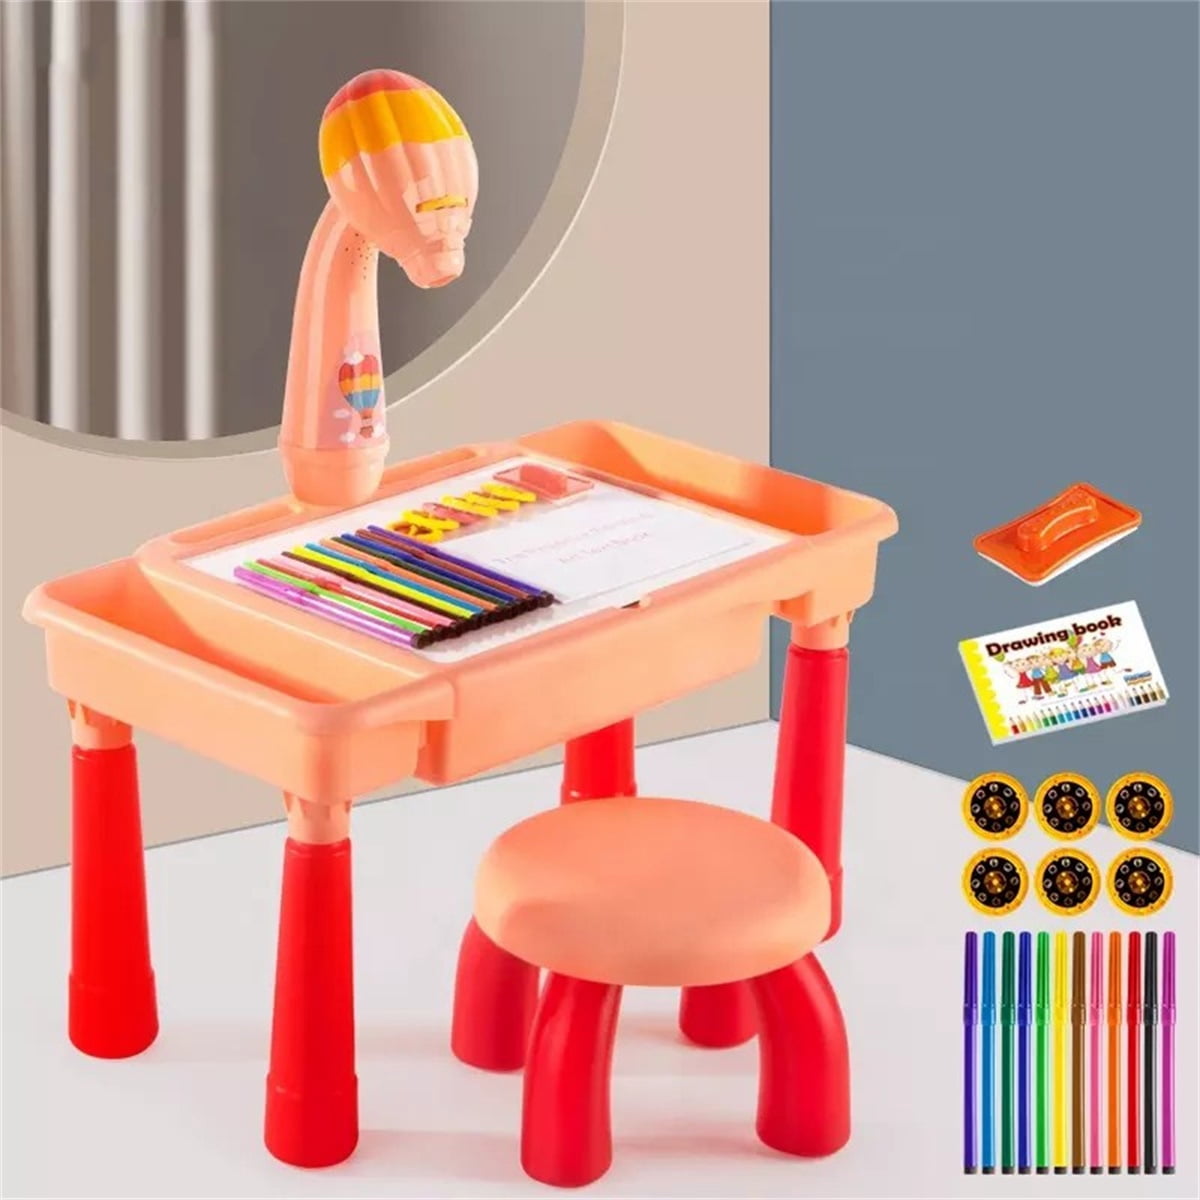 DRAWING PROJECTOR TABLE FOR KIDS – Shoppers Shelter